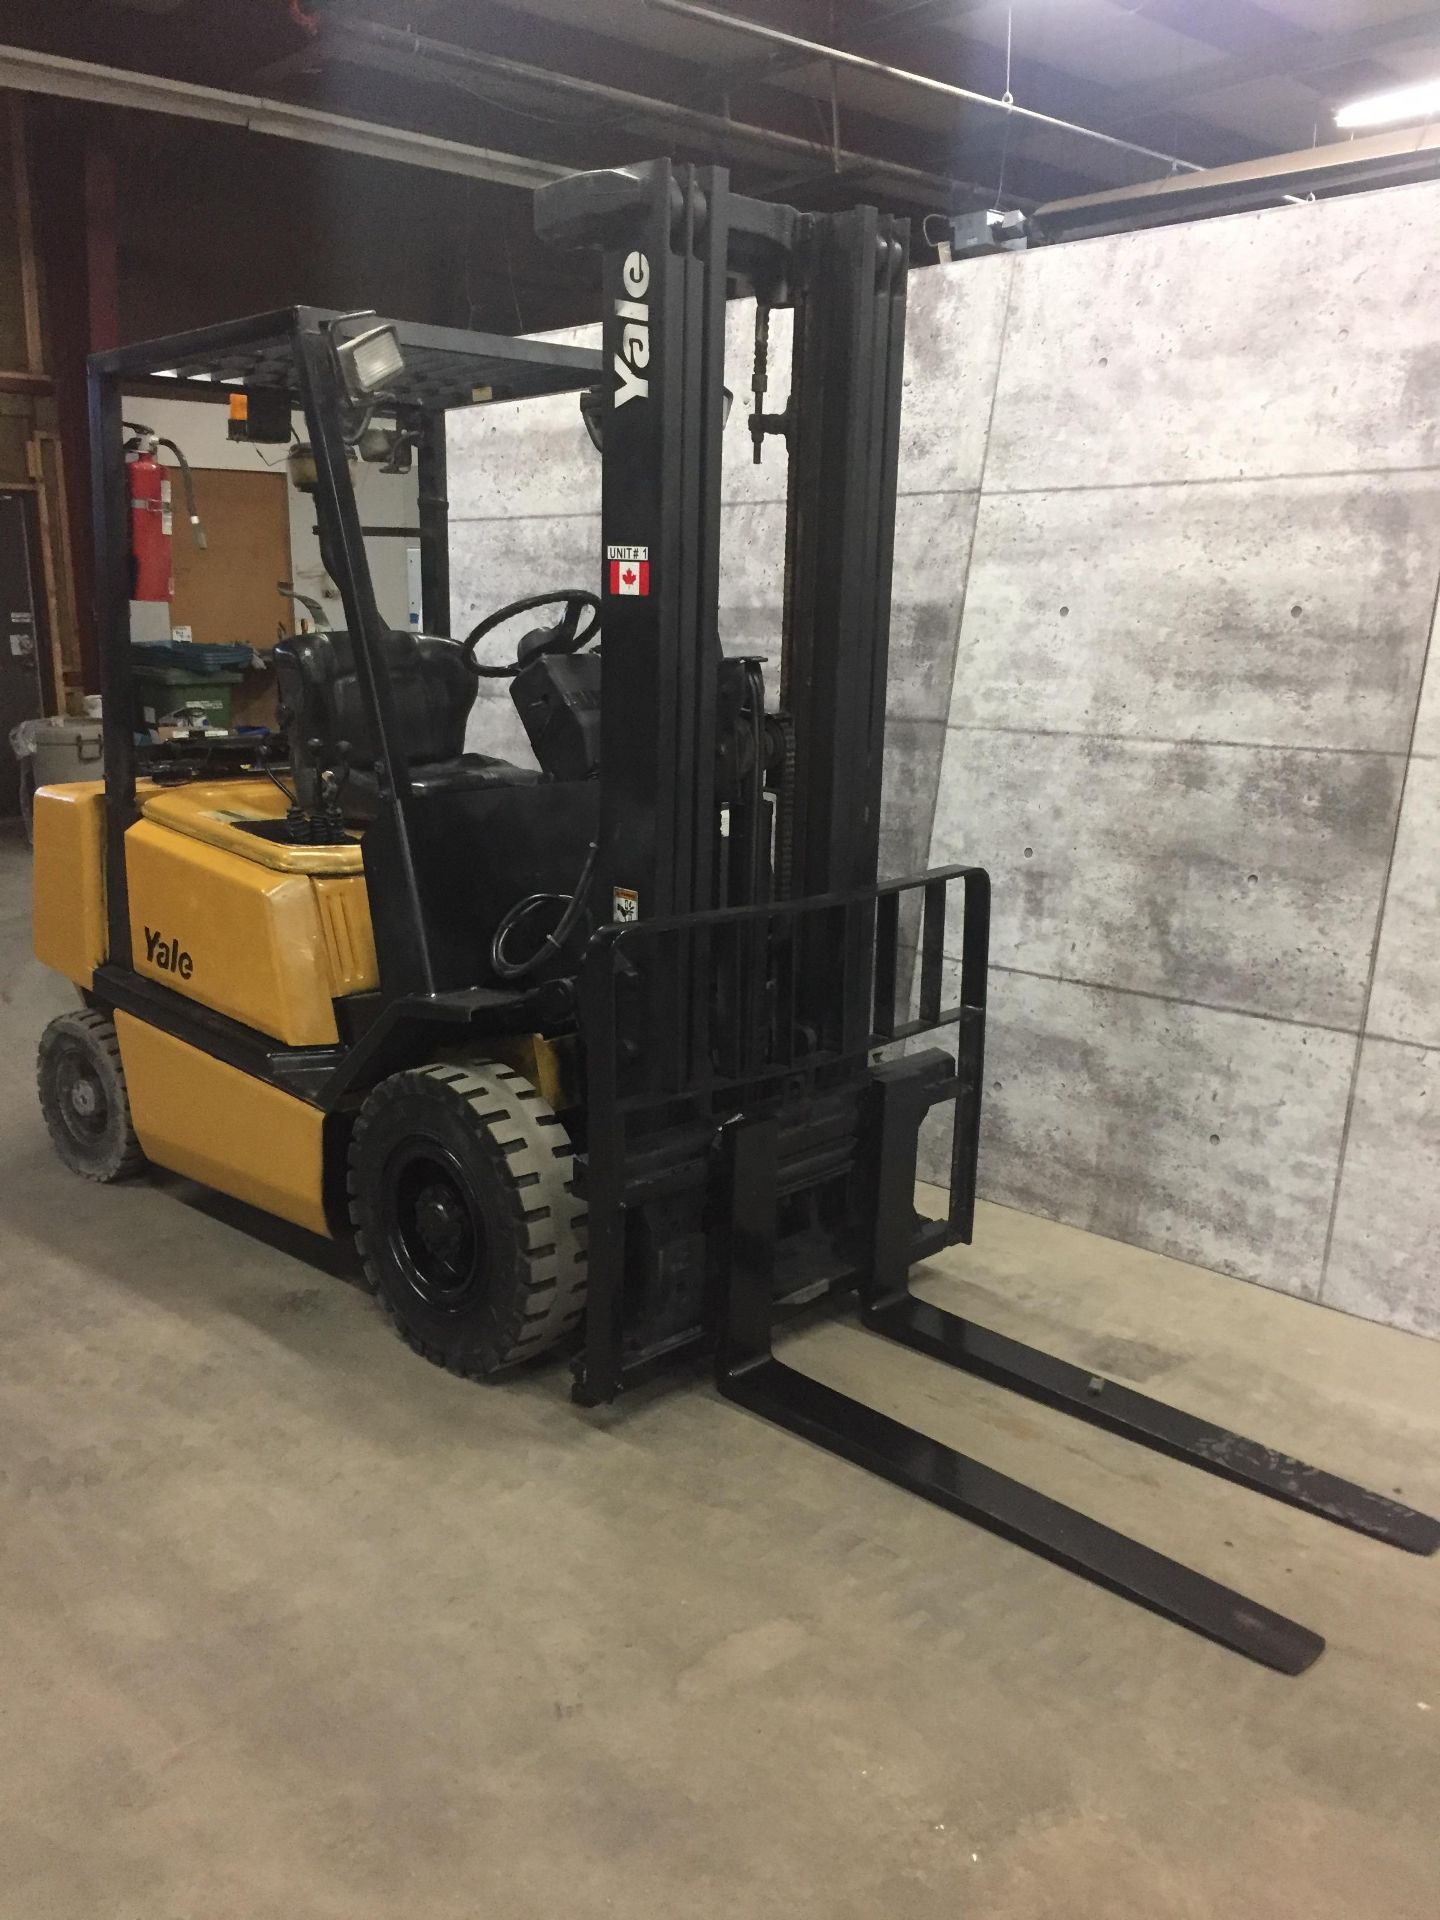 YALE (MODEL #GLP050RGNUAE090) 5,000LBS LP PROPANE 3 STAGE *OUTDOOR* FORKLIFT - SERIAL #A875B06653X - Image 2 of 6